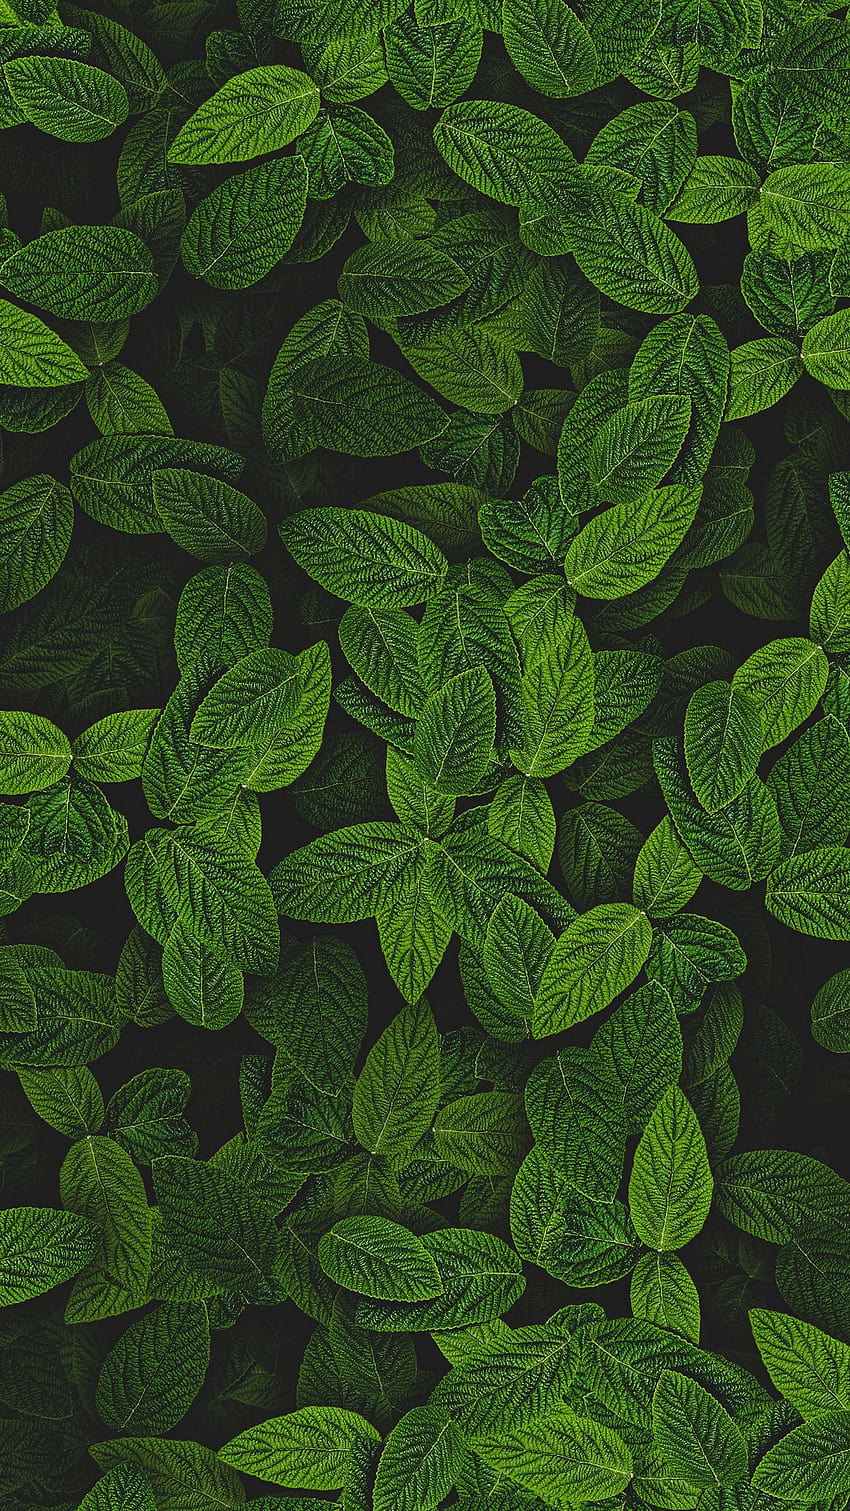 1350x2400 박하, 잎, 식물, 덤불 iphone 8+/7+/6s+/ for parallax backgrounds, mint leaves HD 전화 배경 화면